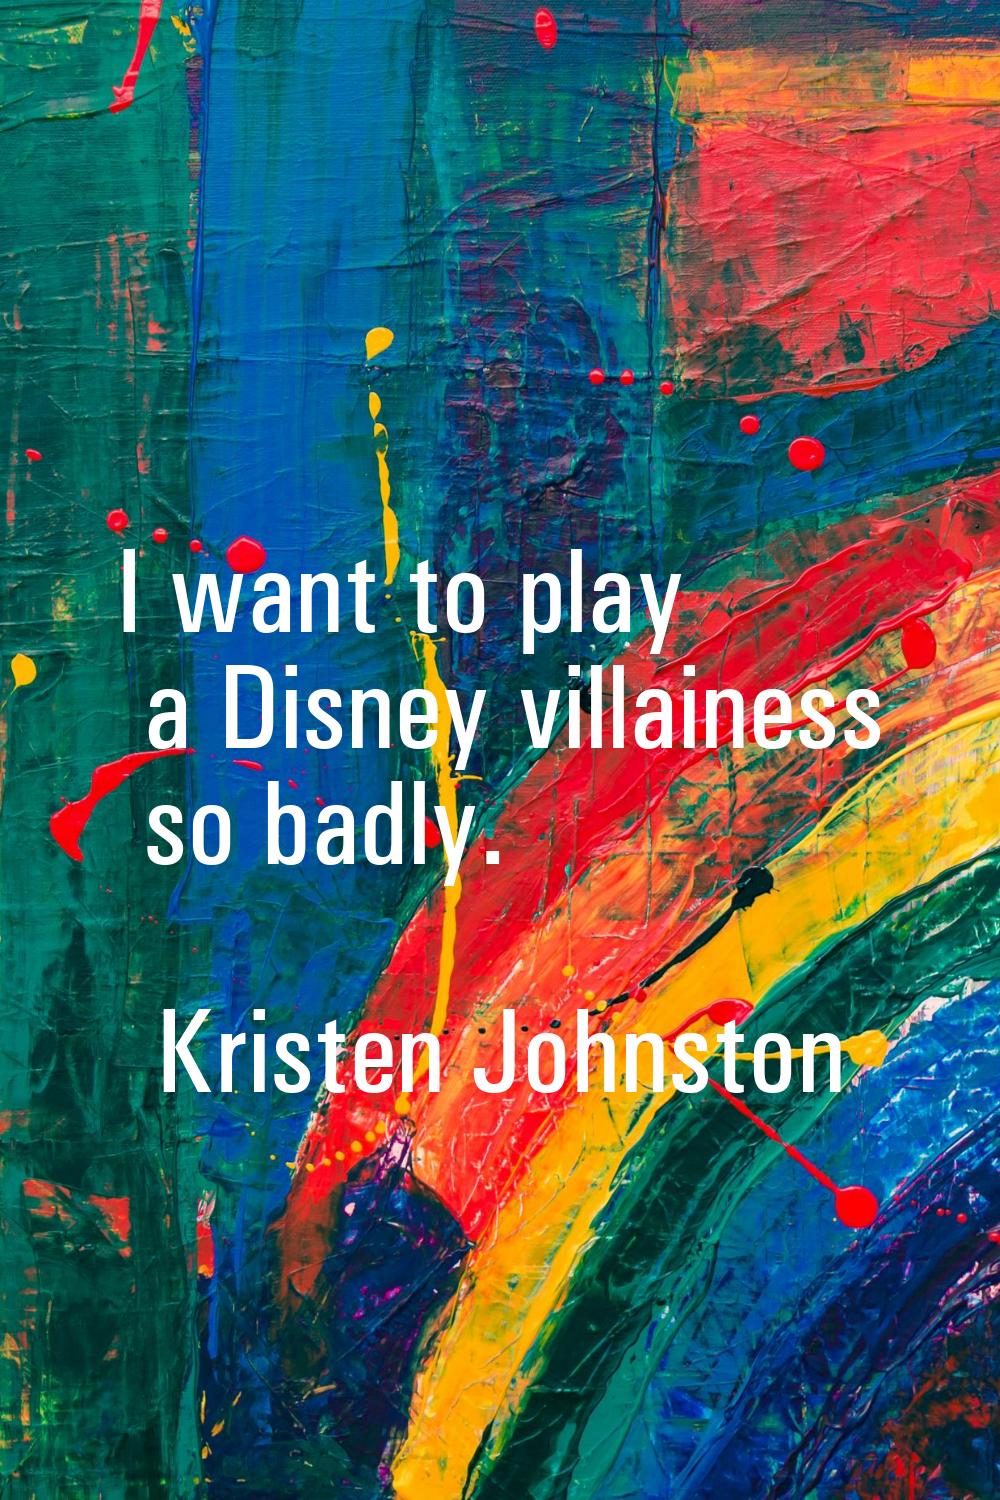 I want to play a Disney villainess so badly.